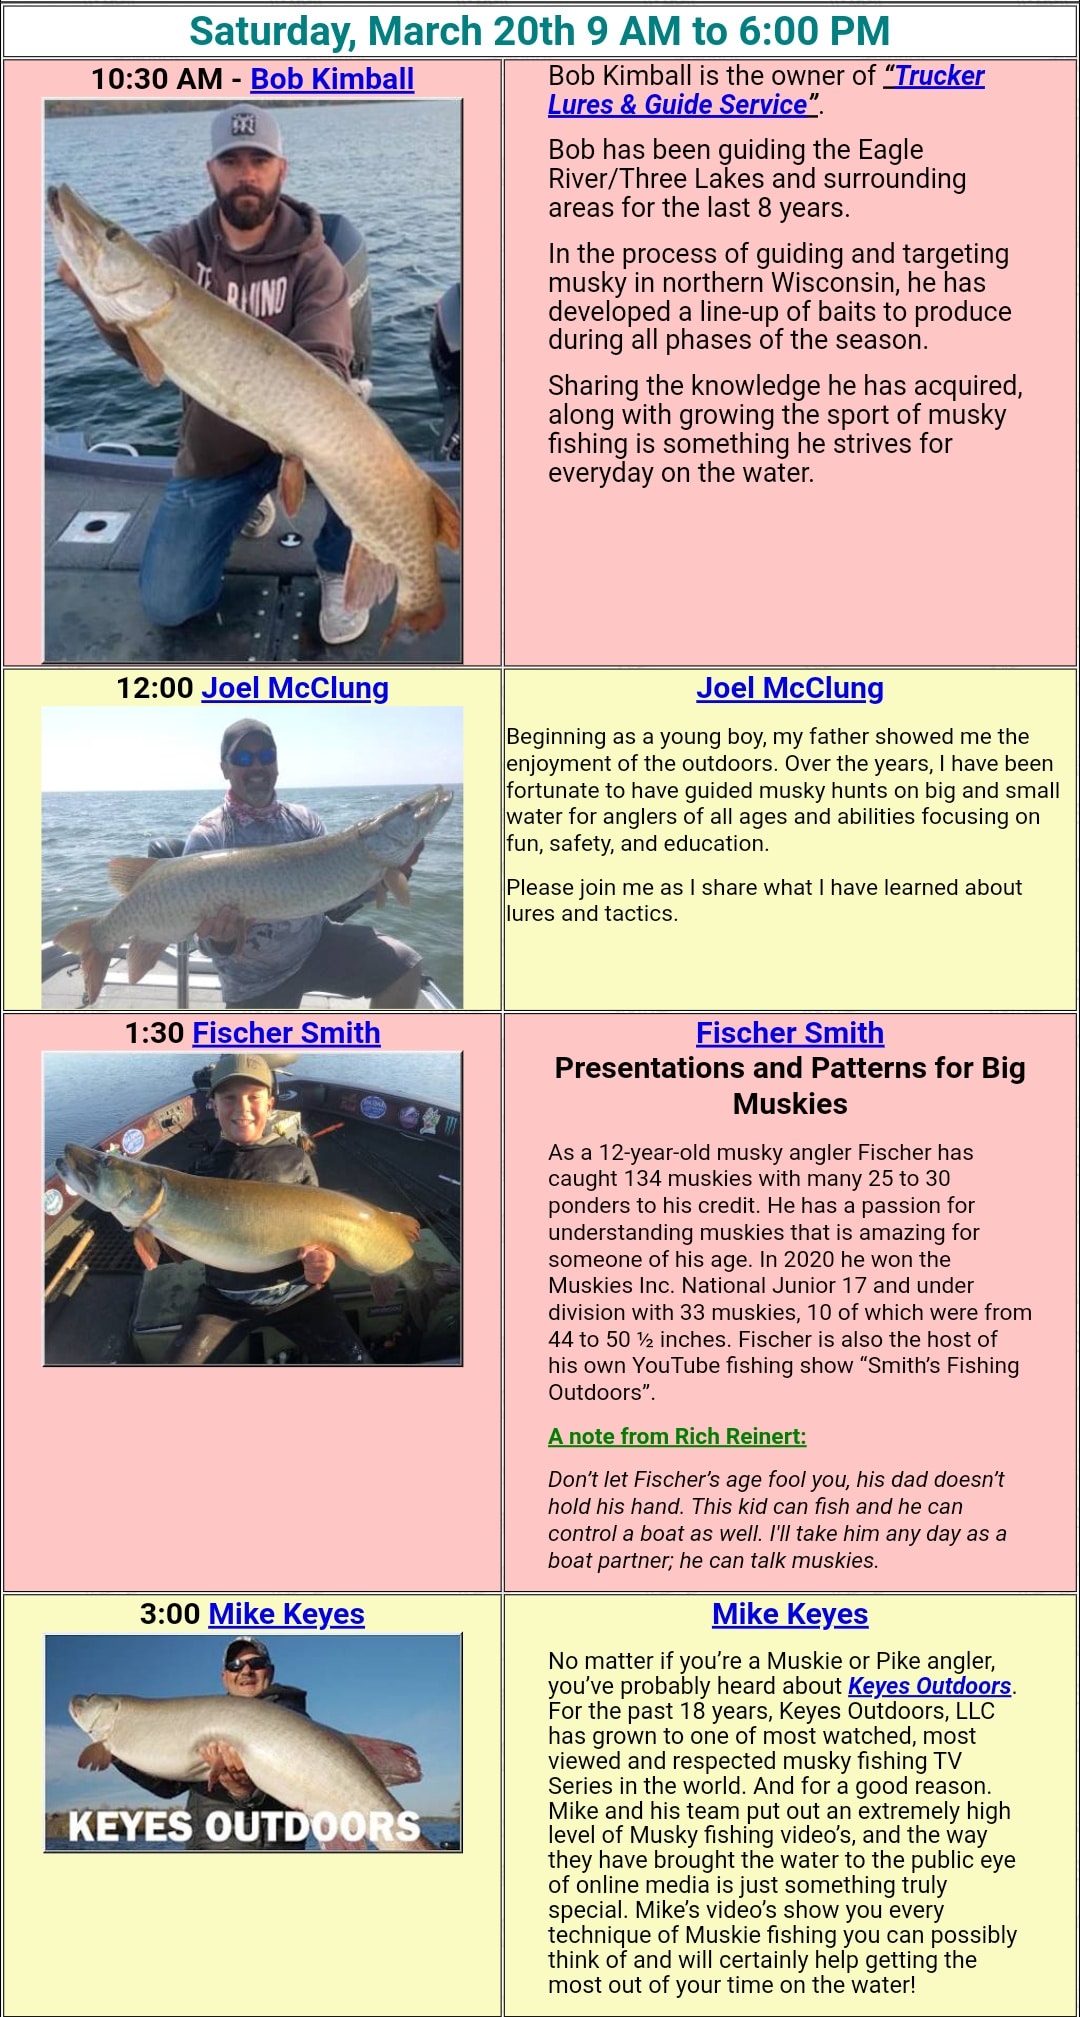 Saturday Speaker Line Up For The Wausau Musky Bash Musky Hunter